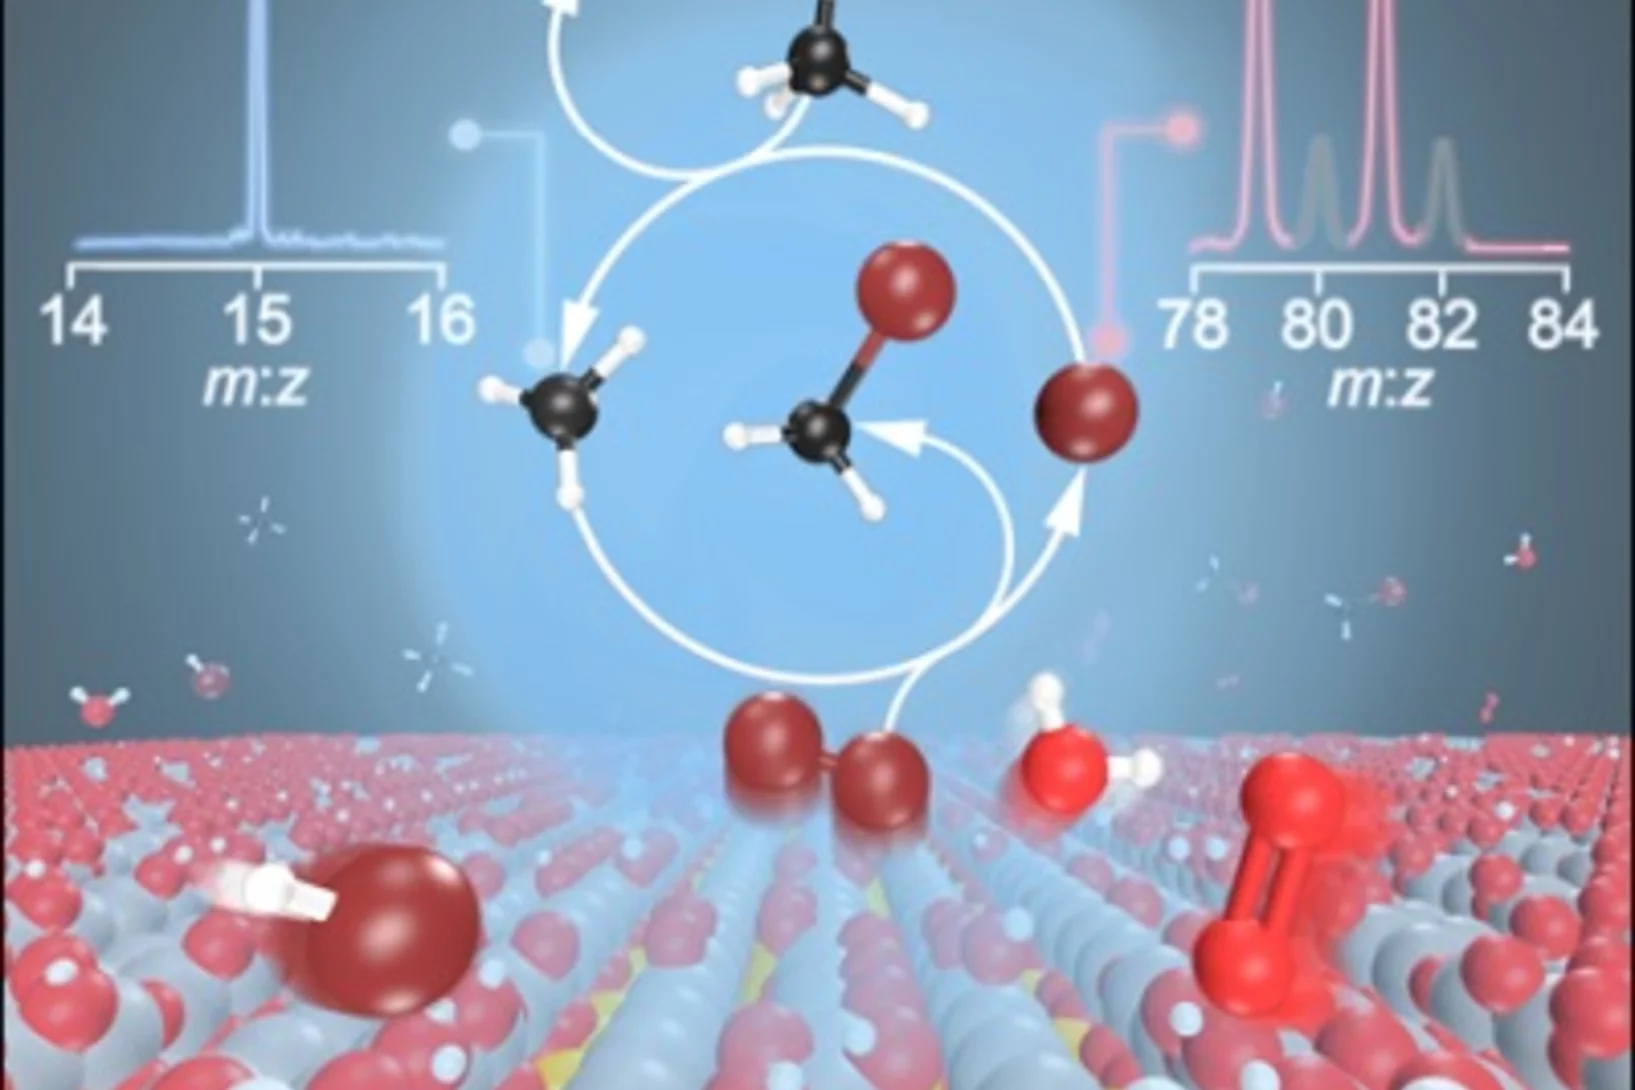 Methyl radicals and bromine atoms were detected in the gas phase revealing the interplay of surface-catalyzed and gas-phase reactions in the catalytic oxybromination of methane.